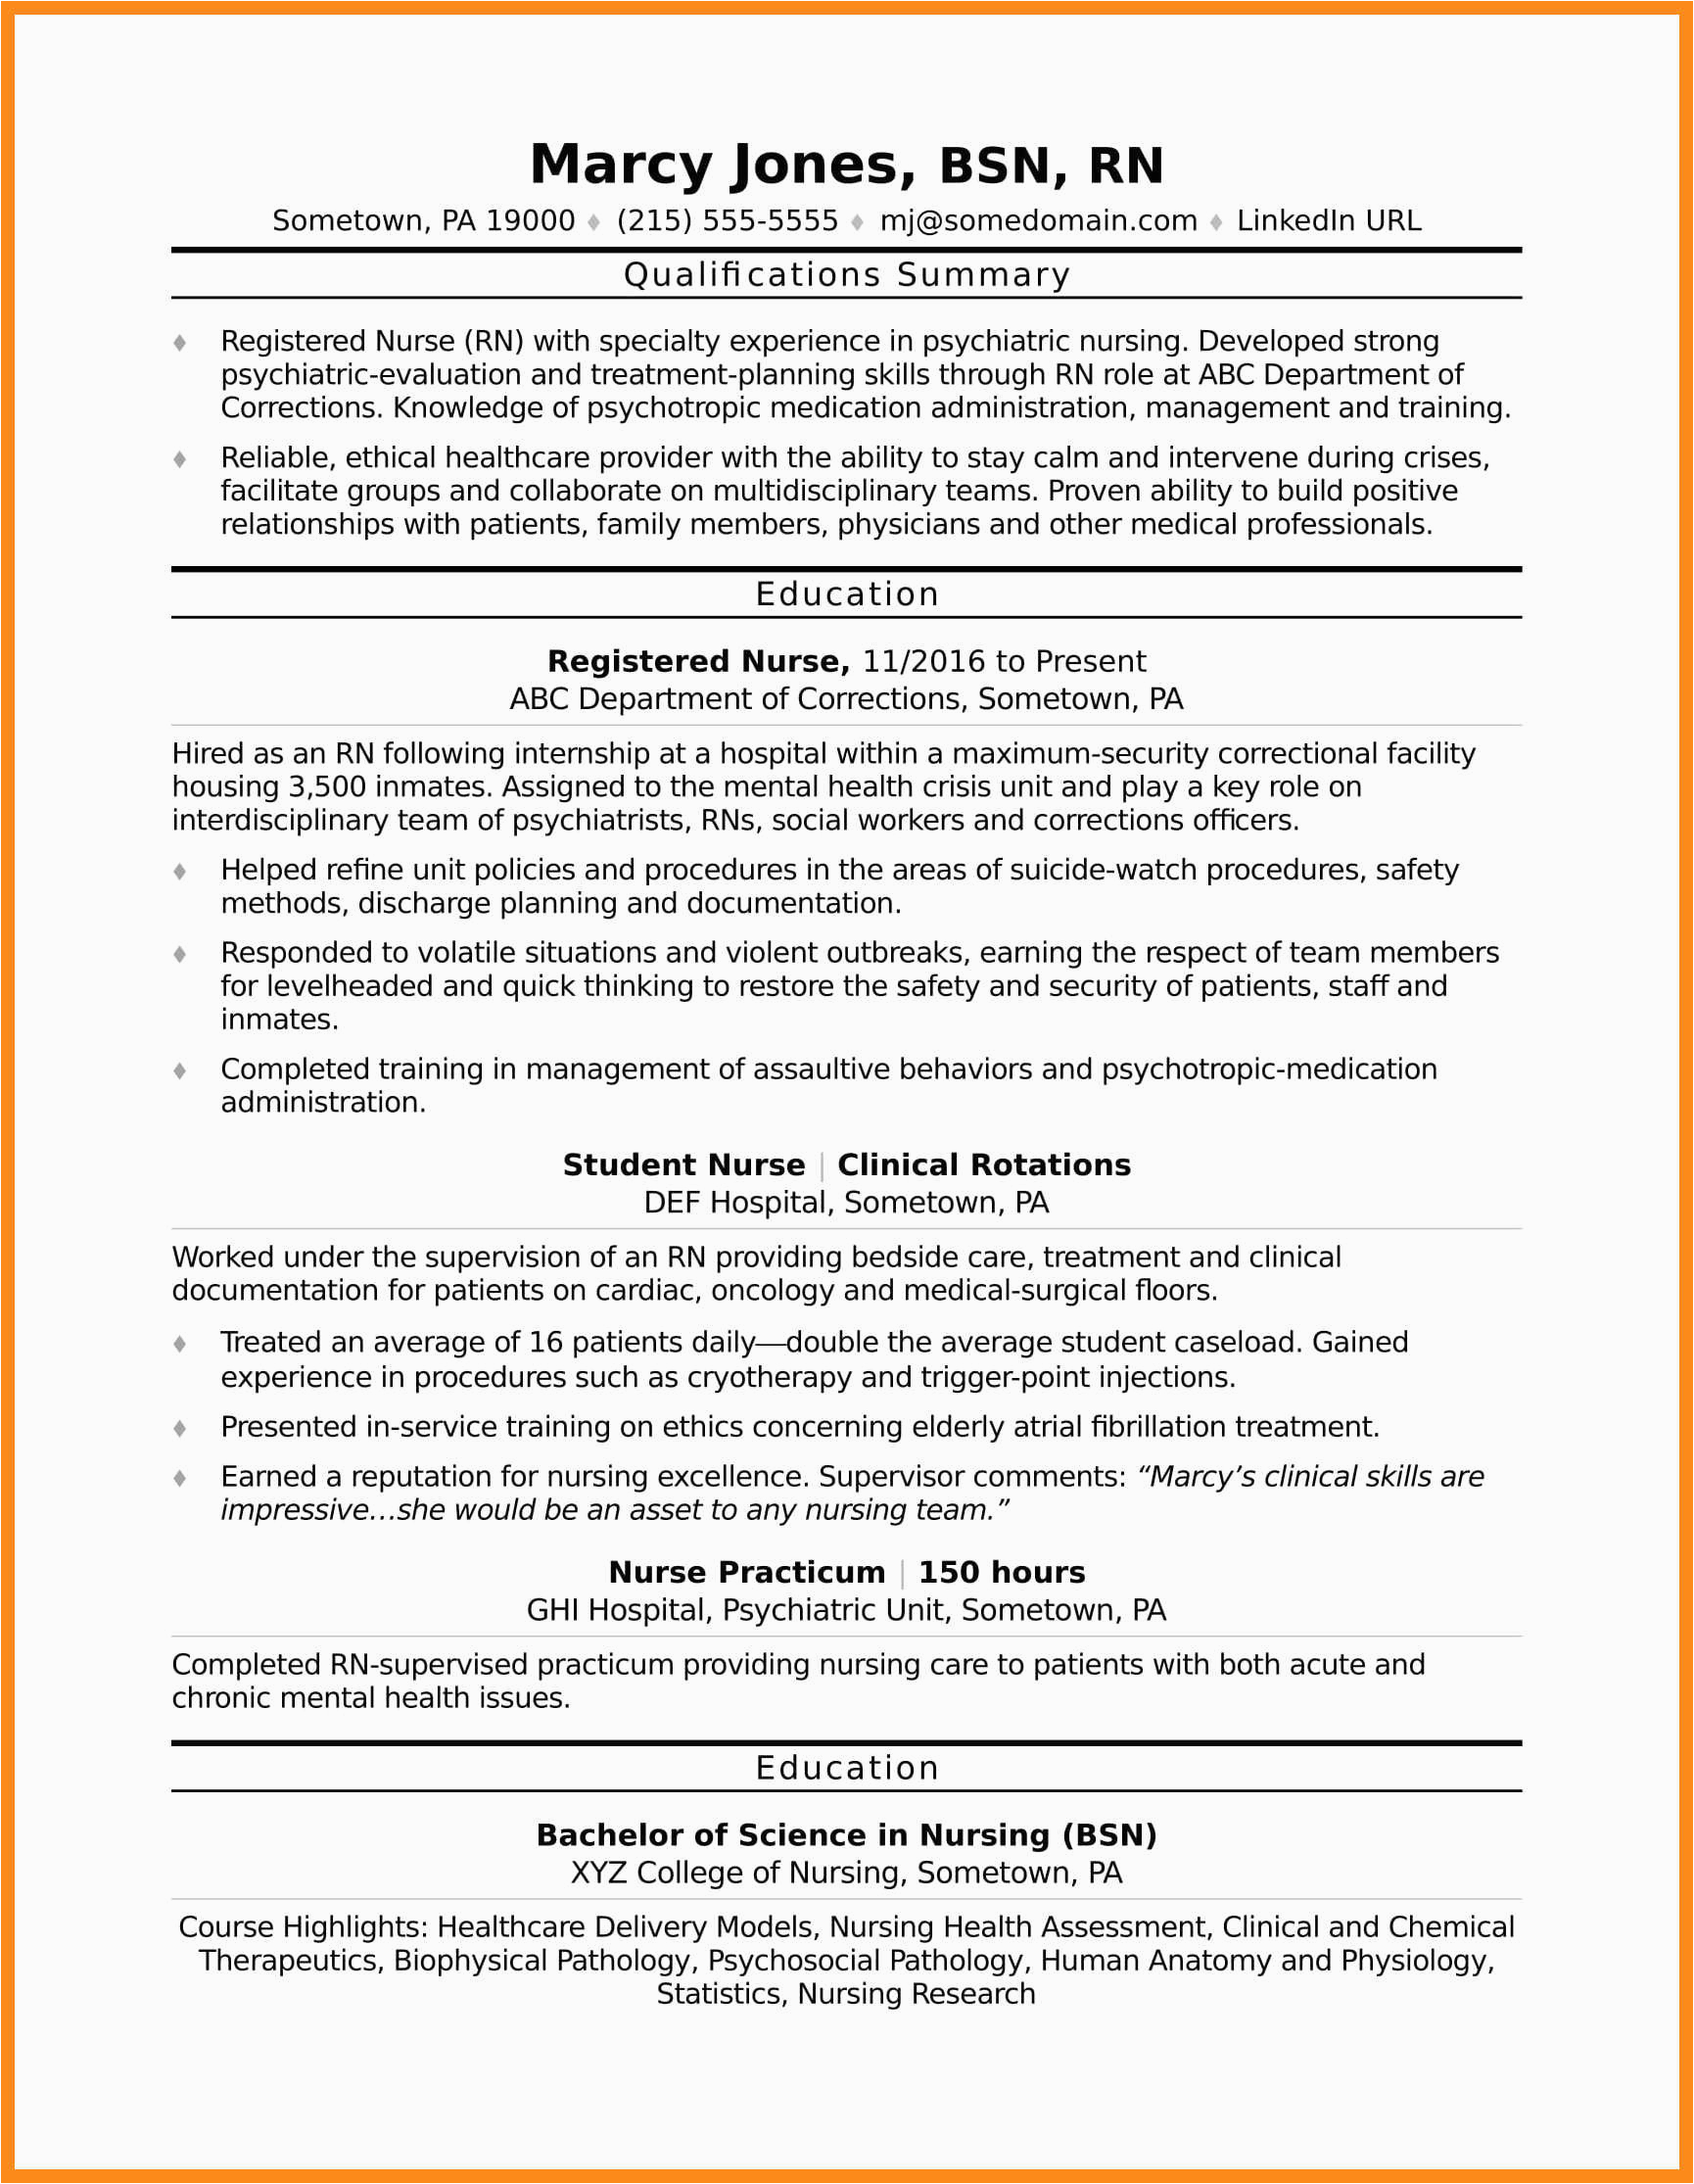 Sample Resume for Nurses without Experience 11 12 Nursing Resume without Experience